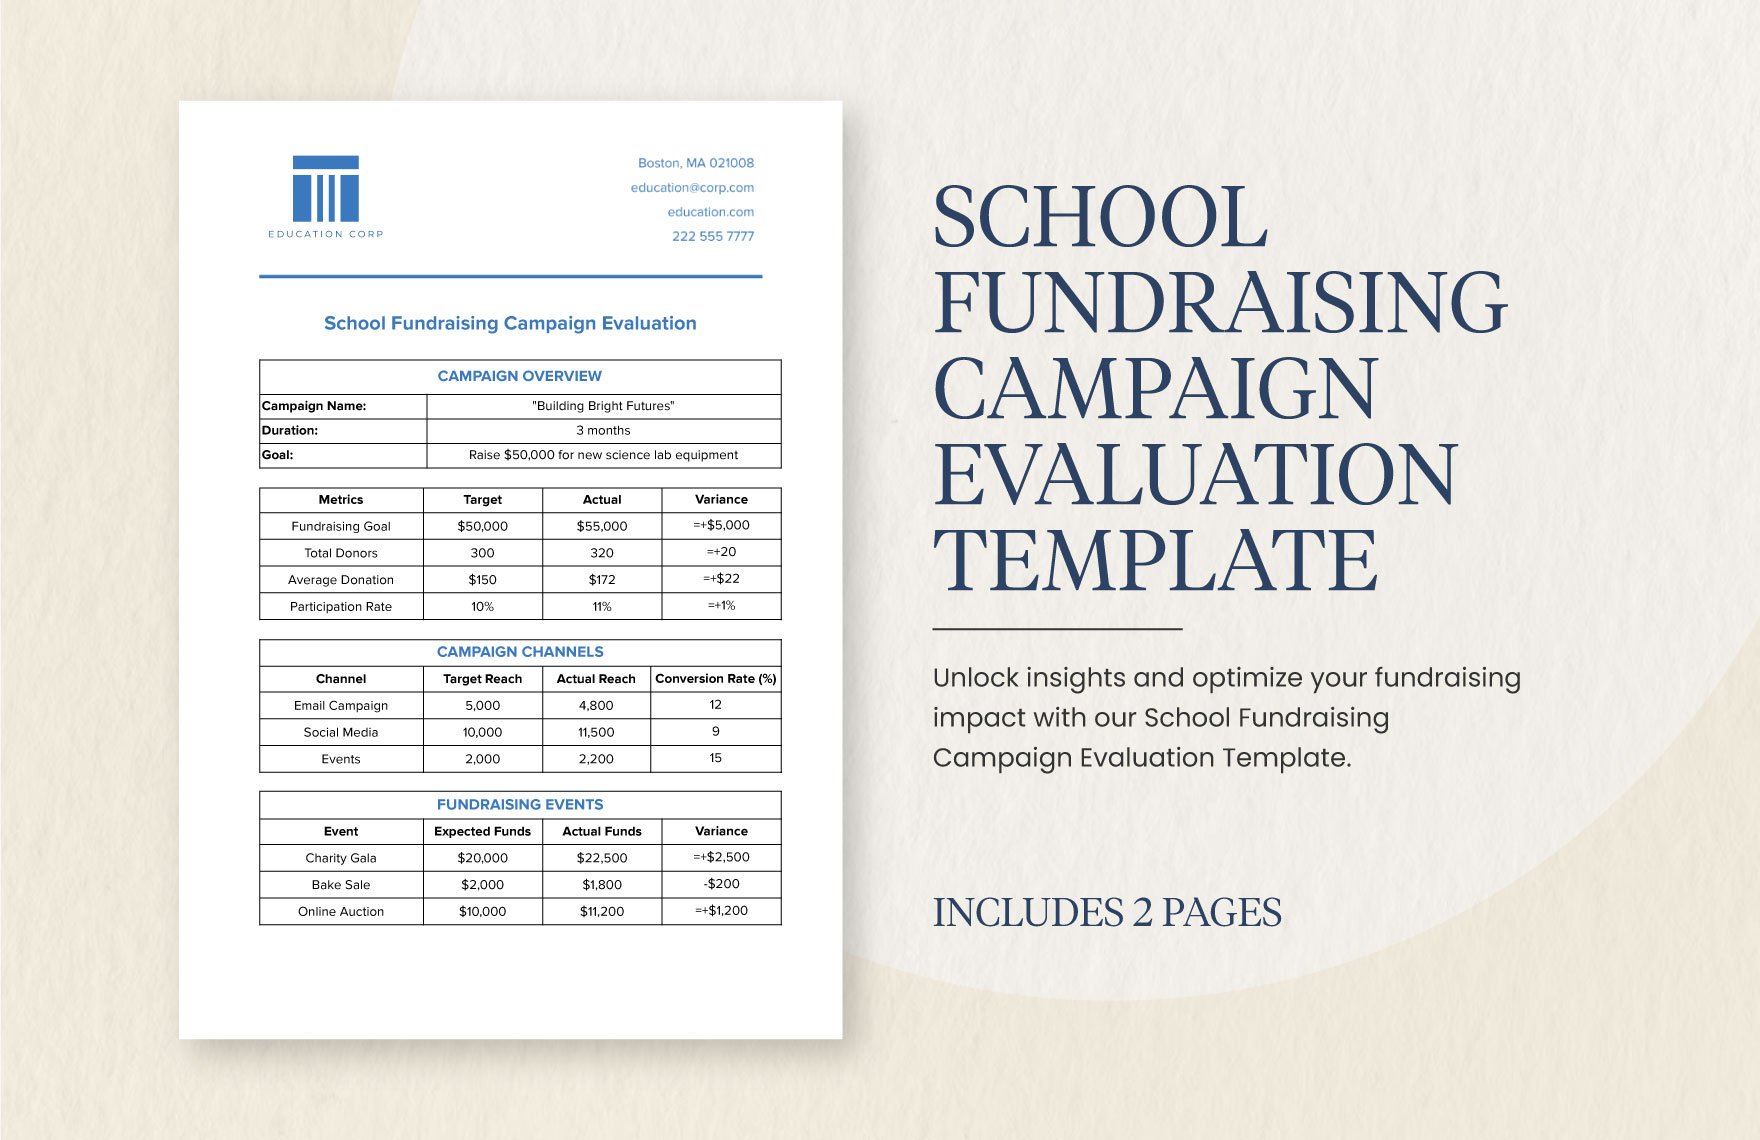 School Fundraising Campaign Evaluation Template in Word, Google Docs, PDF